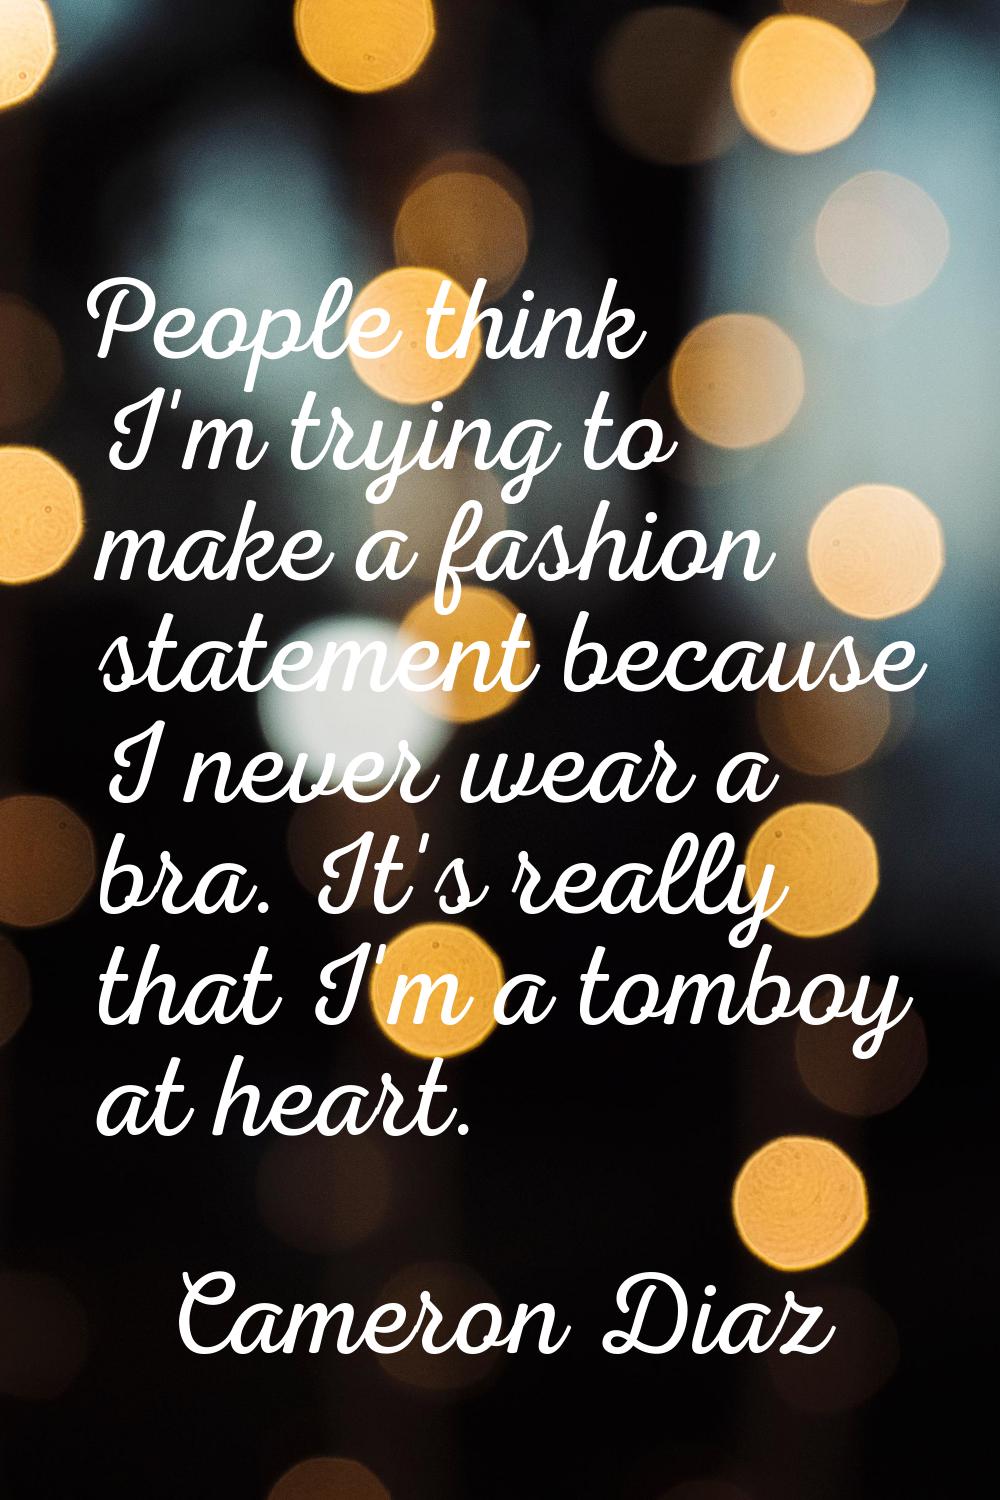 People think I'm trying to make a fashion statement because I never wear a bra. It's really that I'